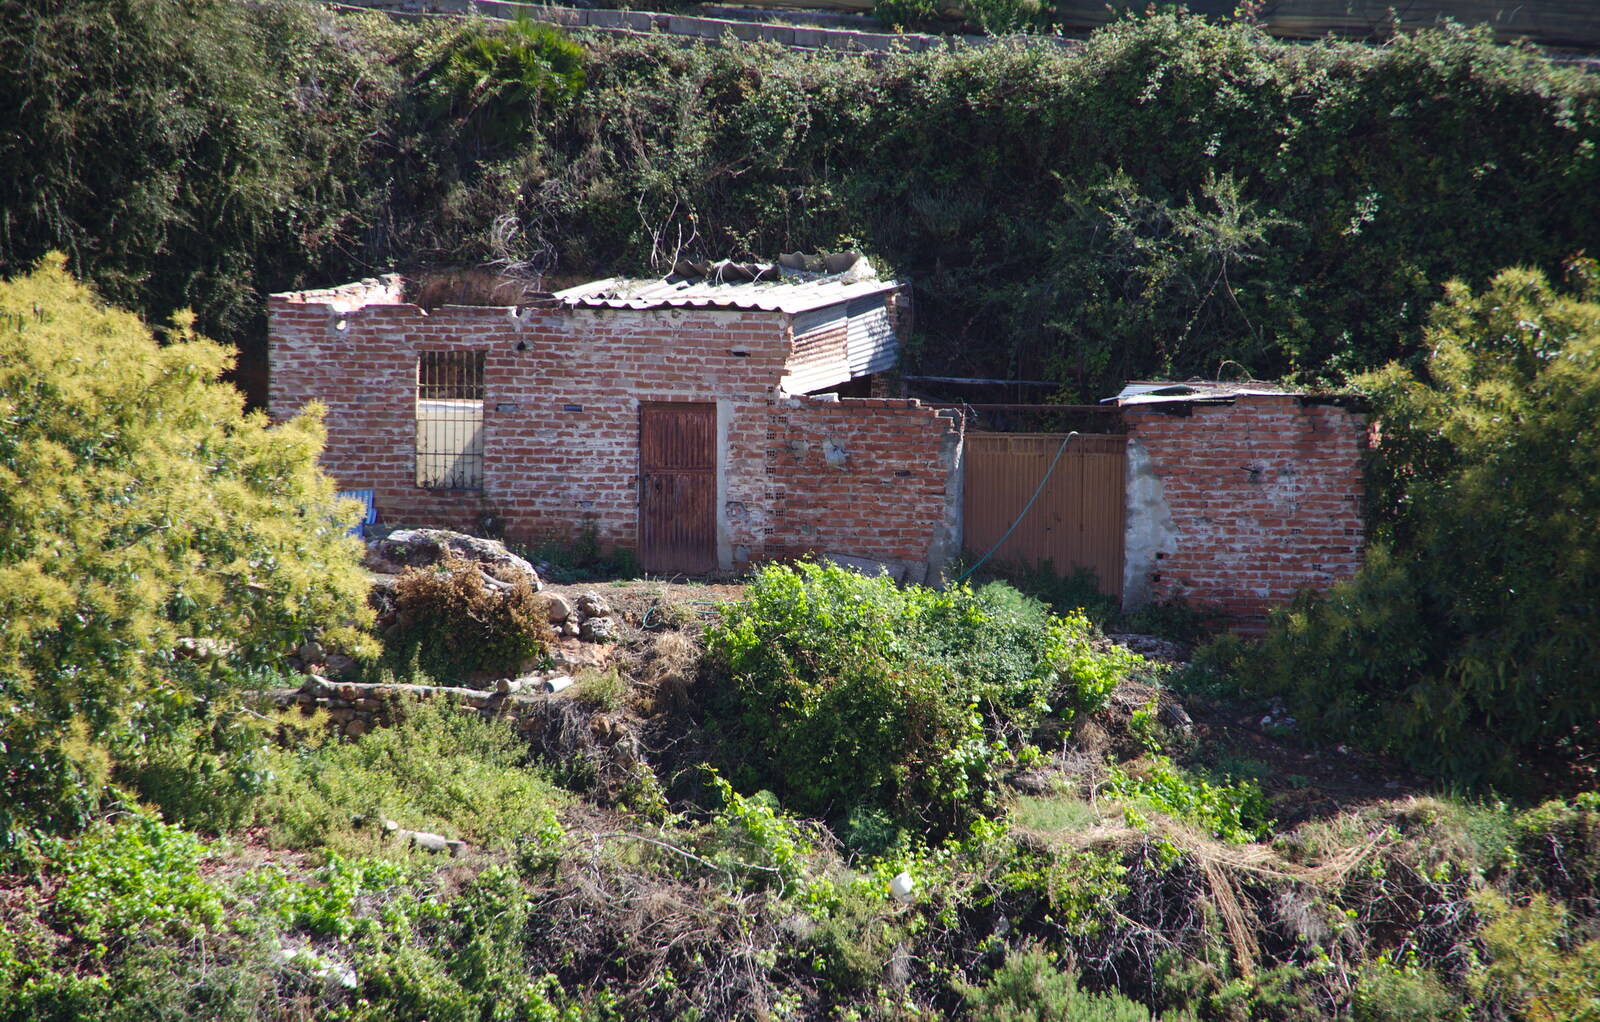 Some sort of derelict building from The Caves of Nerja, and Frigiliana, Andalusia, Spain - 18th April 2019